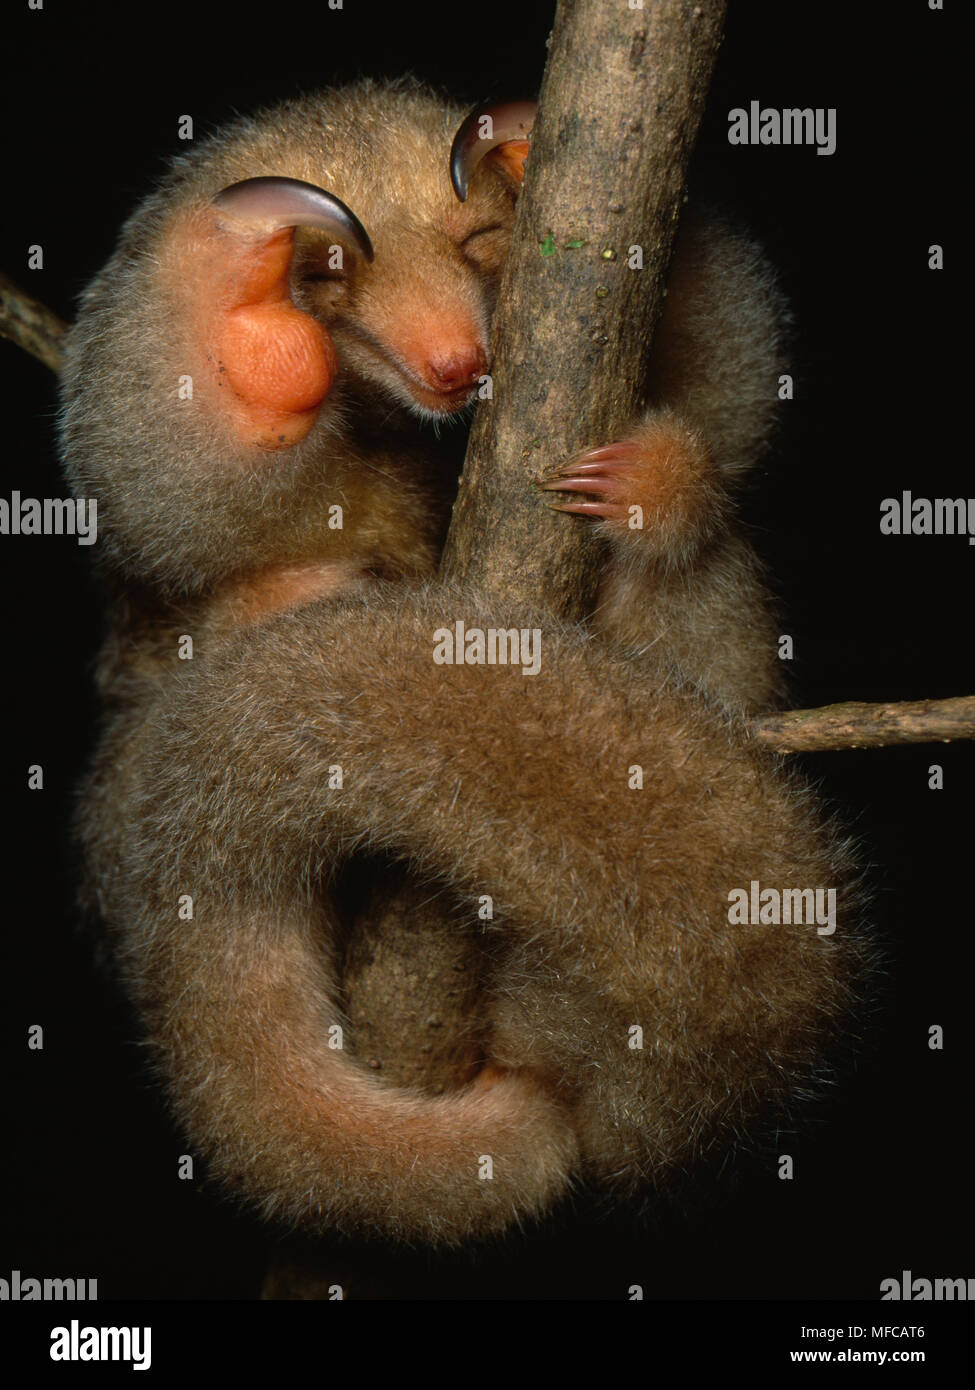 TWO-TOED or SILKY ANTEATER  Cyclopes didactylus  sleeping on Mangrove  Caroni Swamp, Trinidad, West Indies Stock Photo